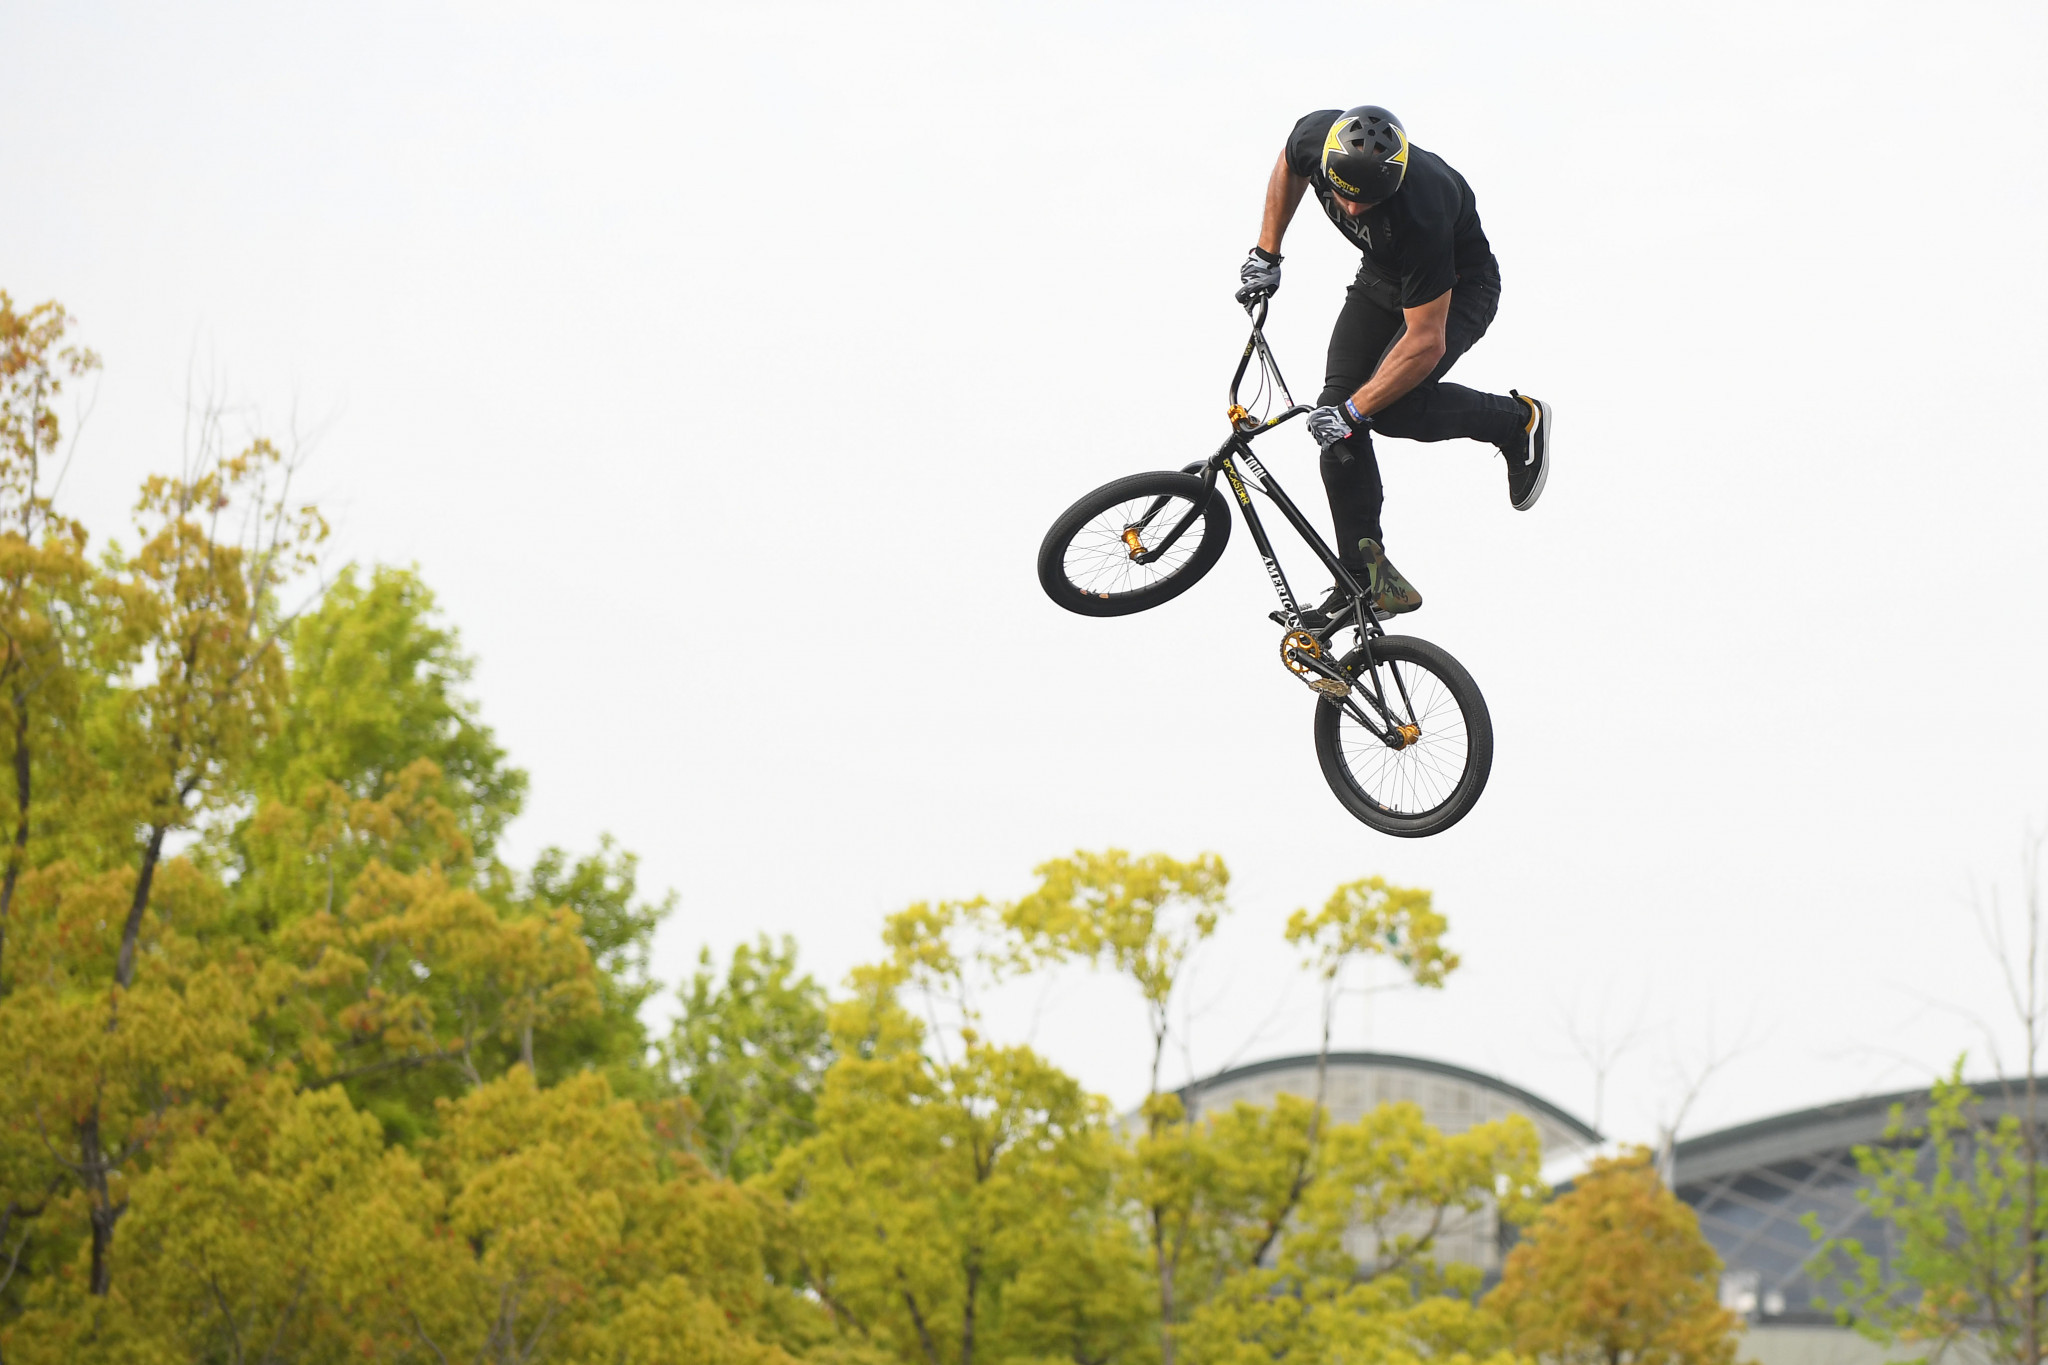 Bruce impresses in BMX Freestyle Park qualifying at FISE World Series